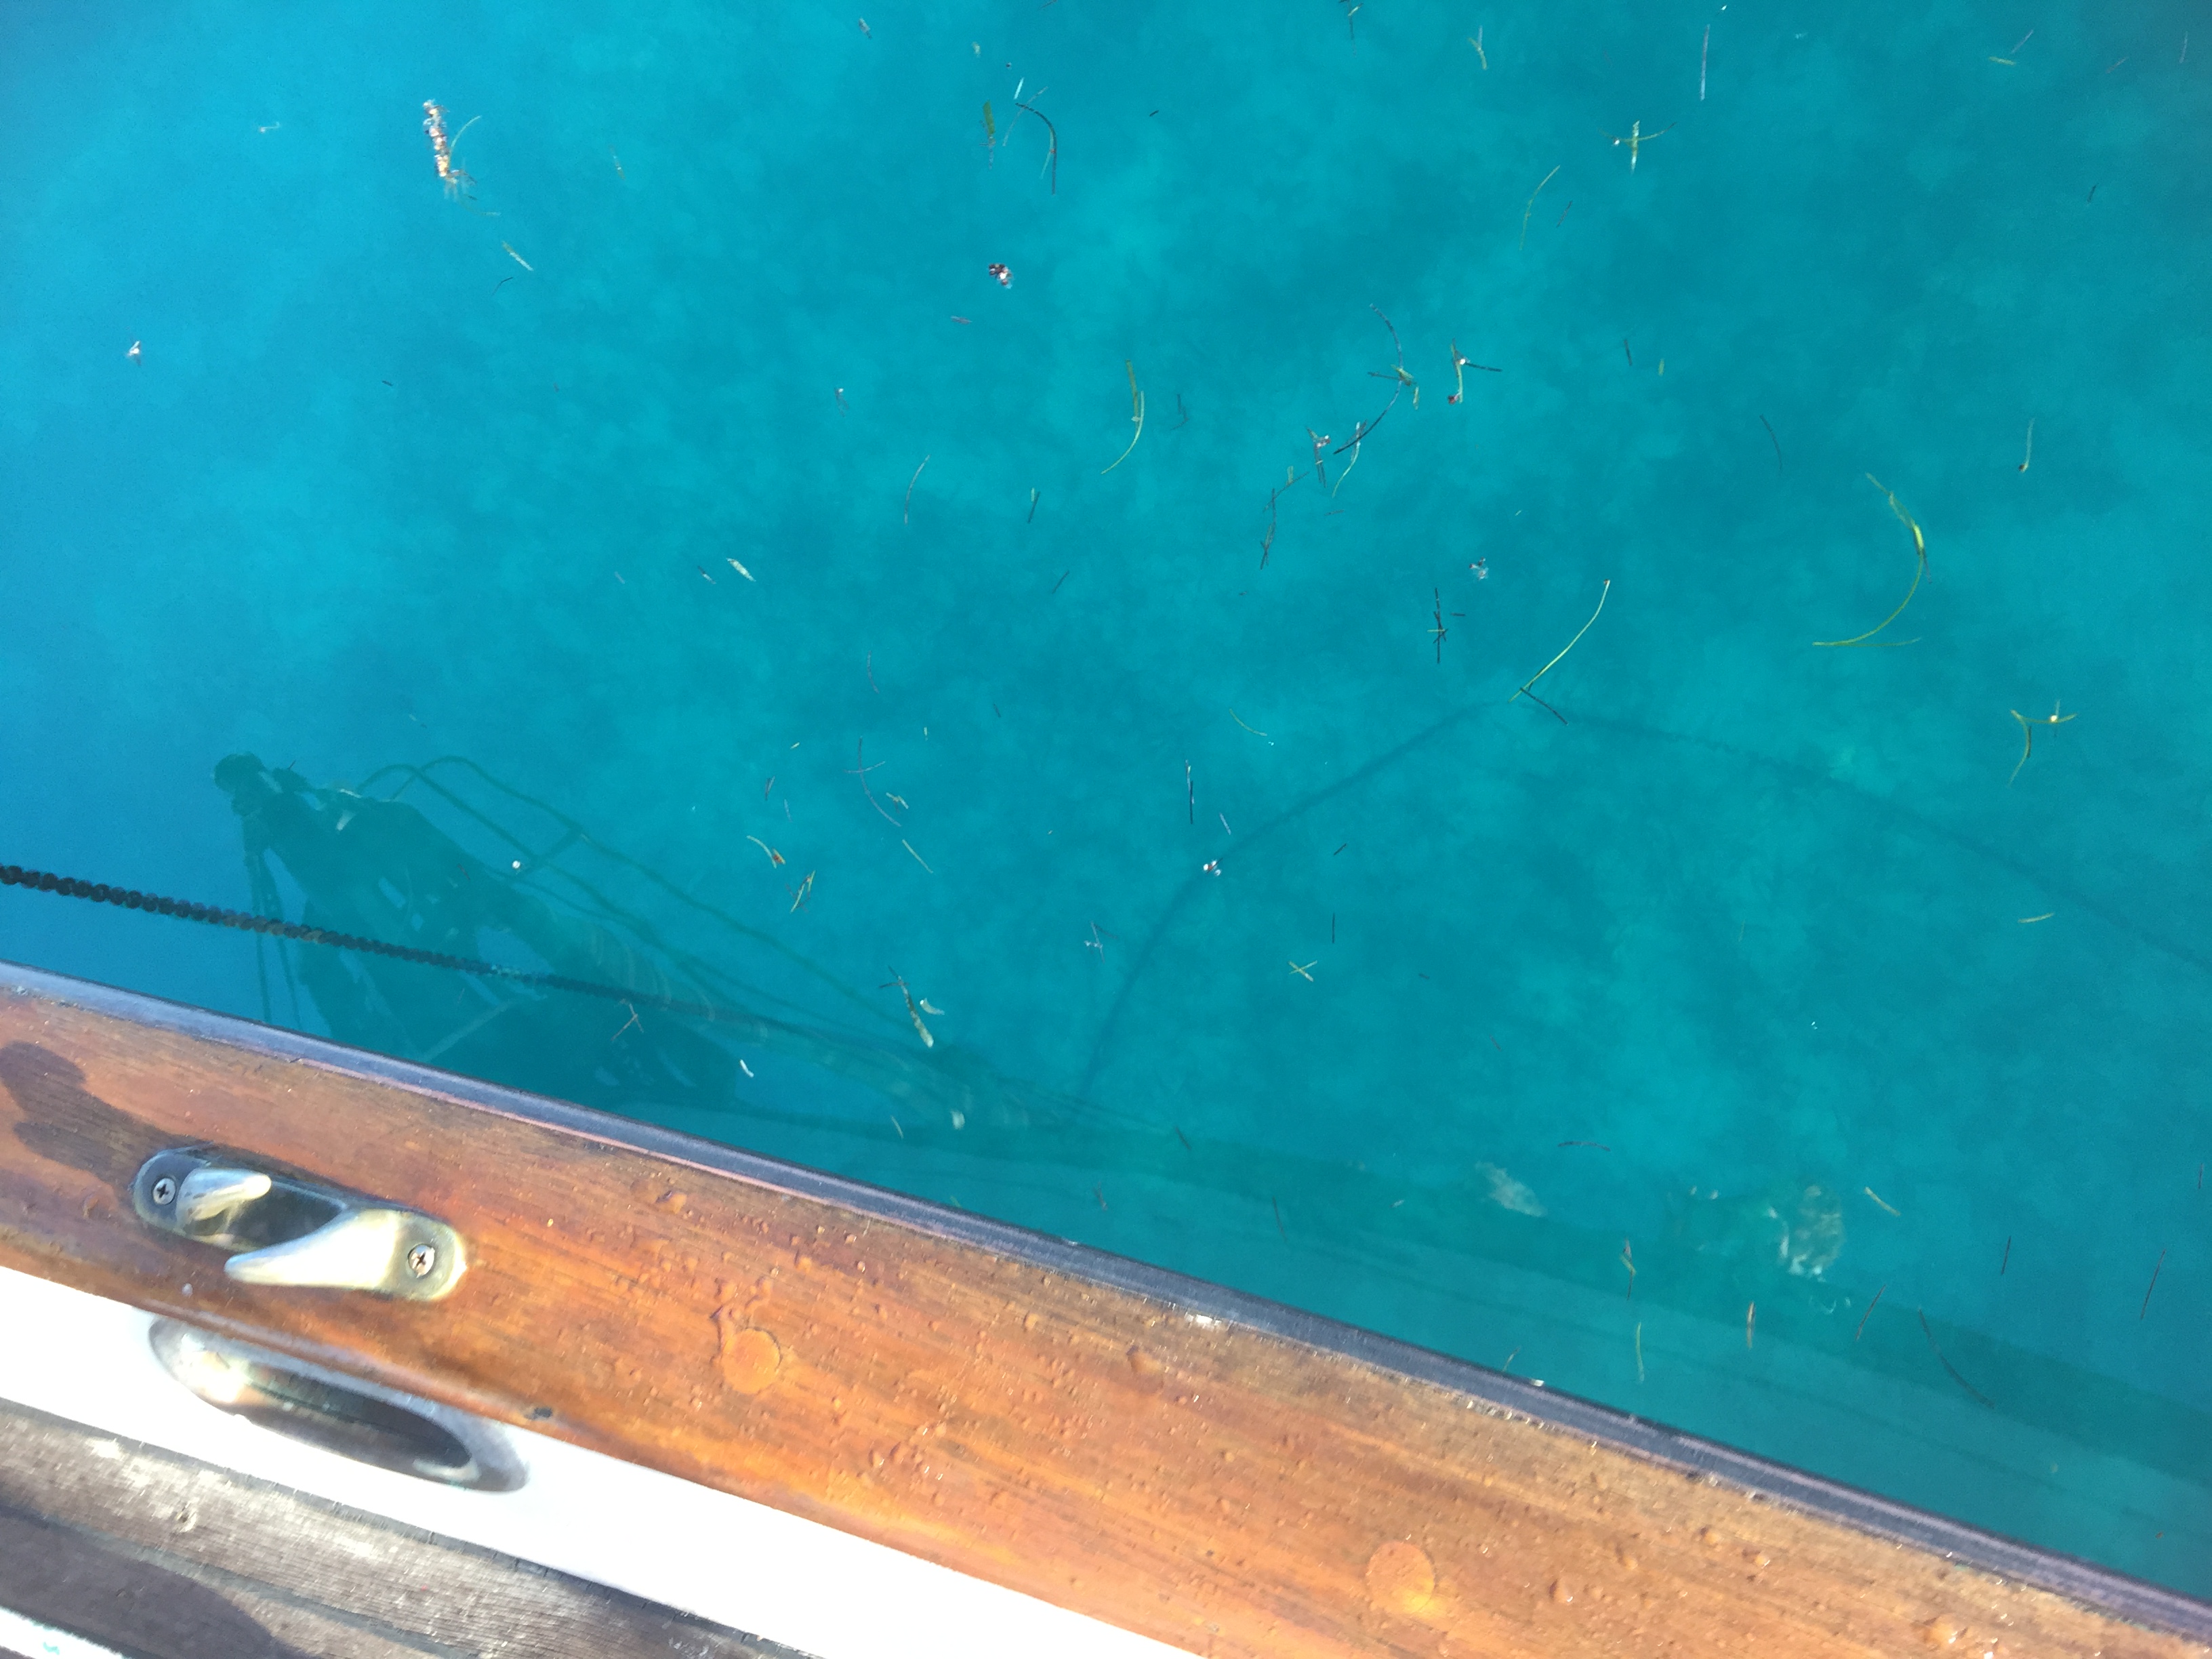 The water is so clear, we can see the anchor chain (black line right under the boat)